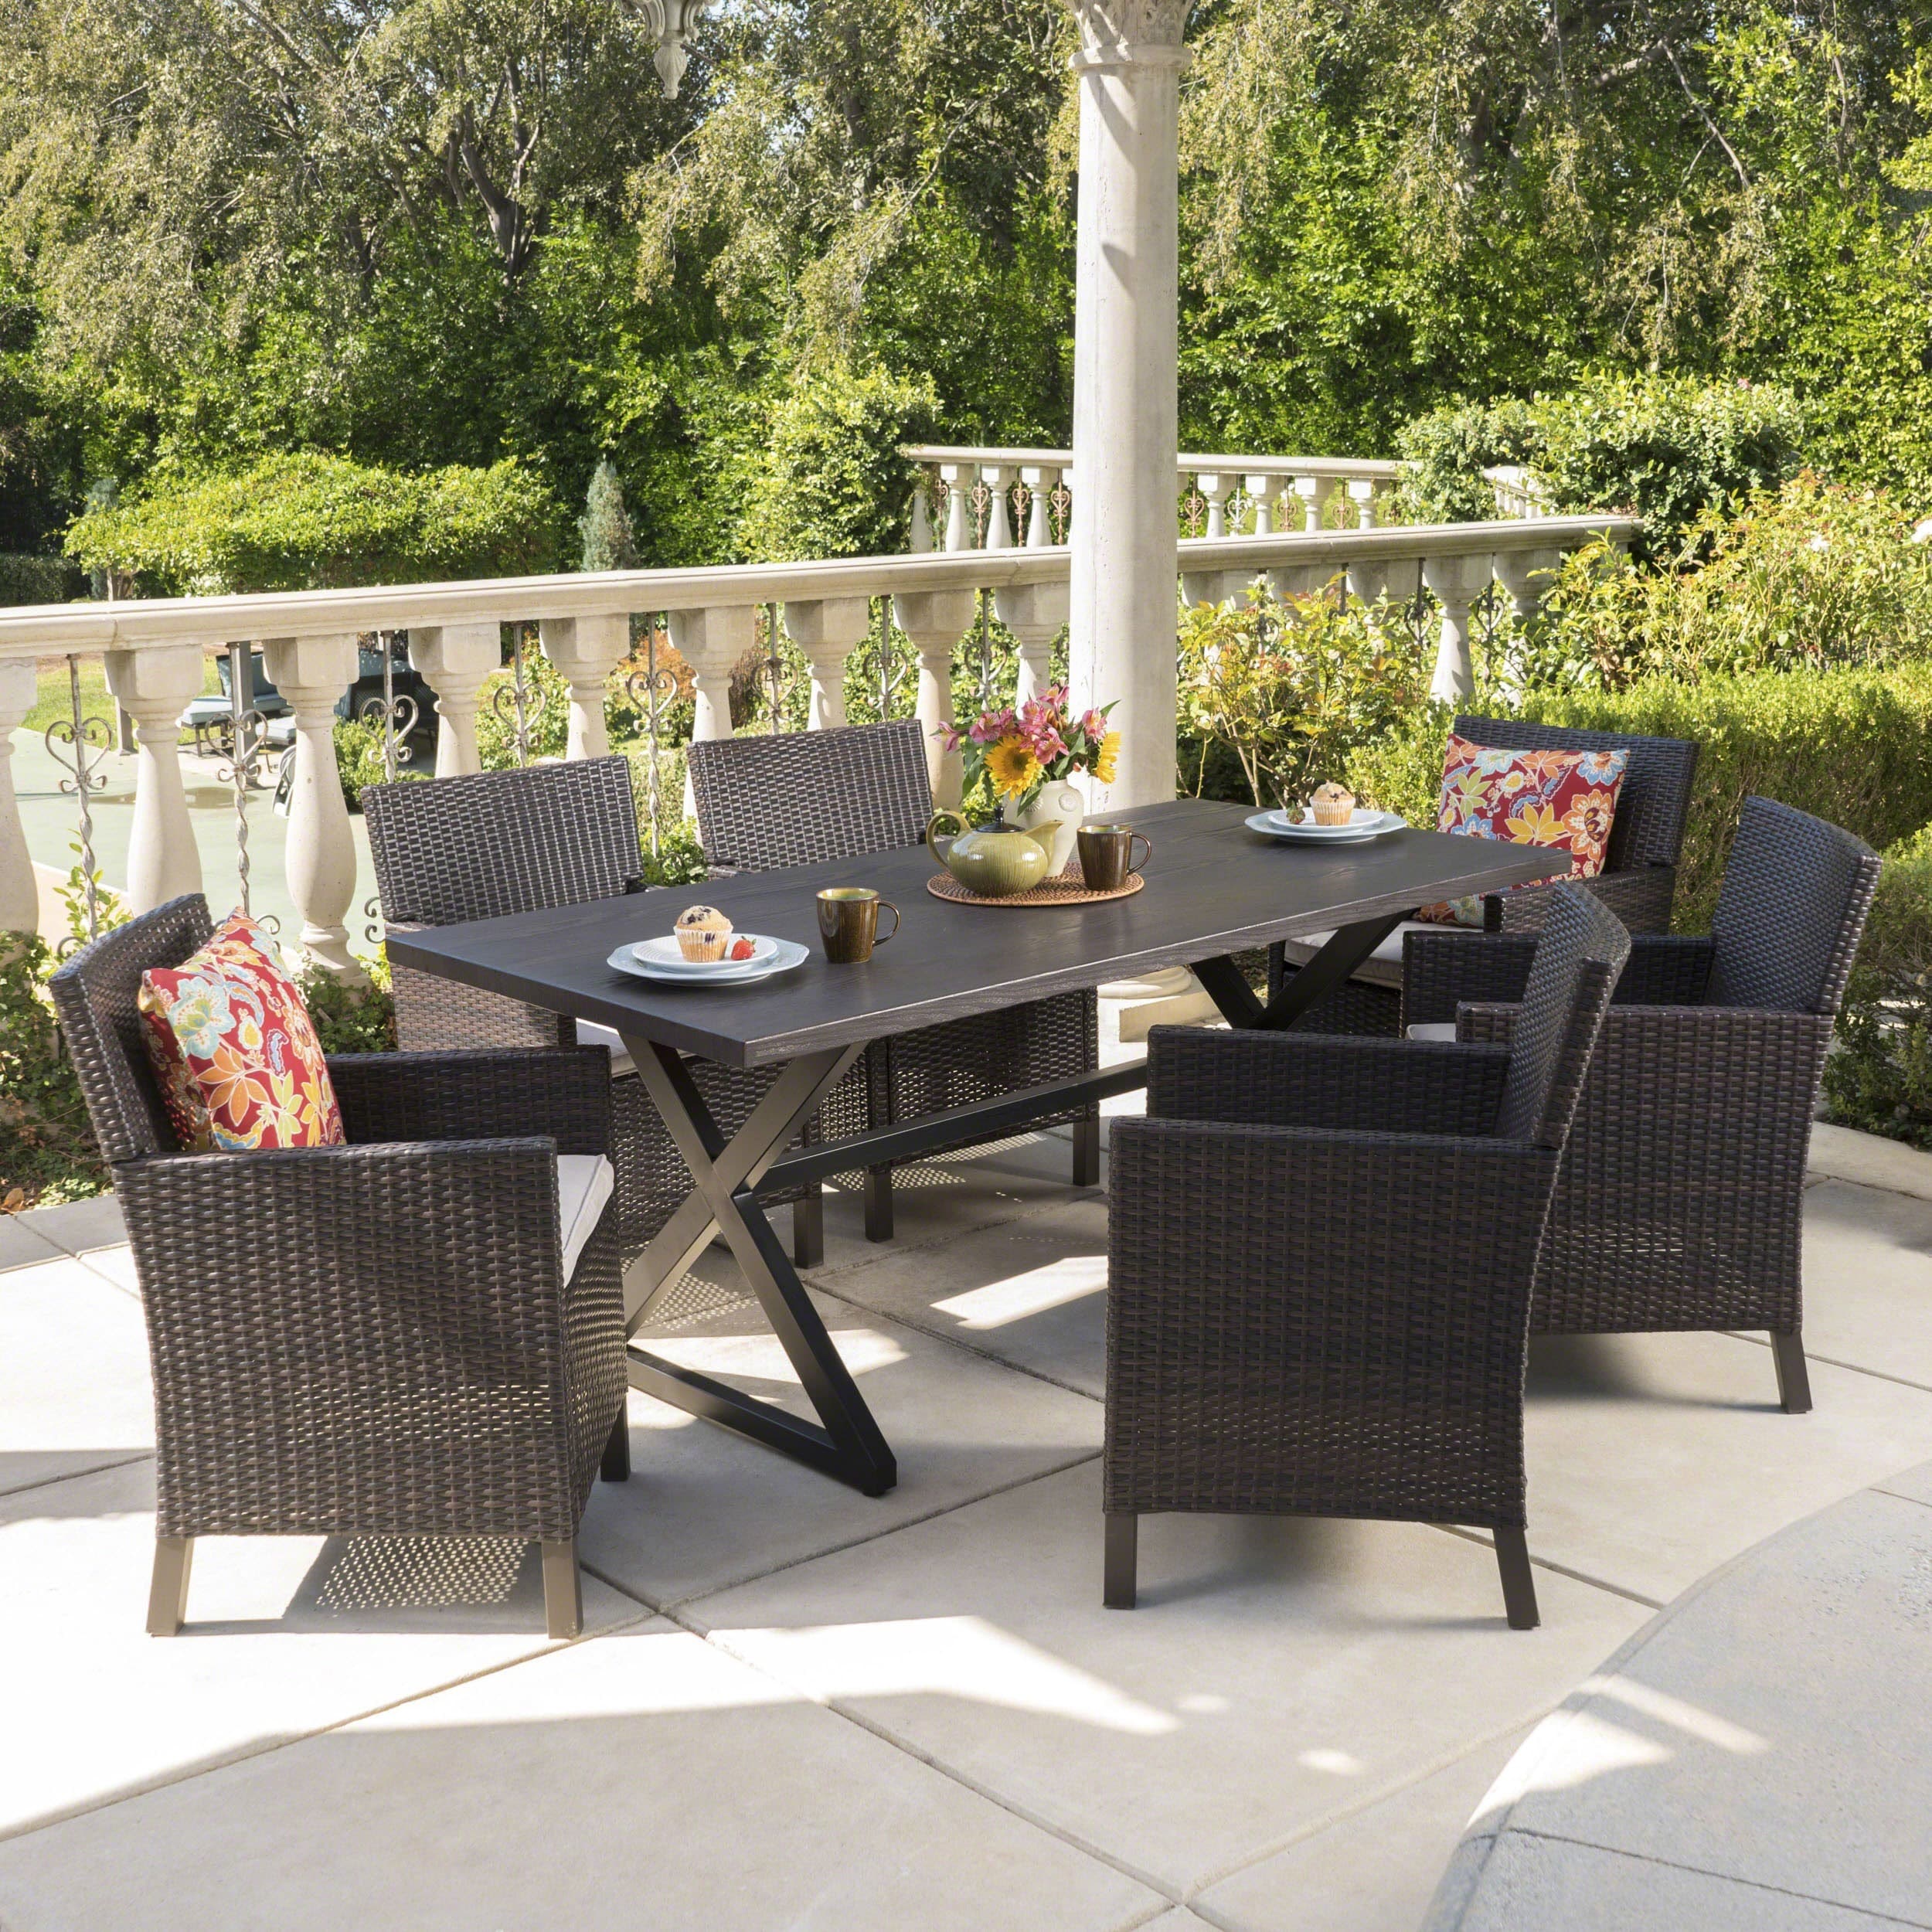 Blair Outdoor 7-piece Aluminum Wicker Dining Set With Cushions By Christopher Knight Home